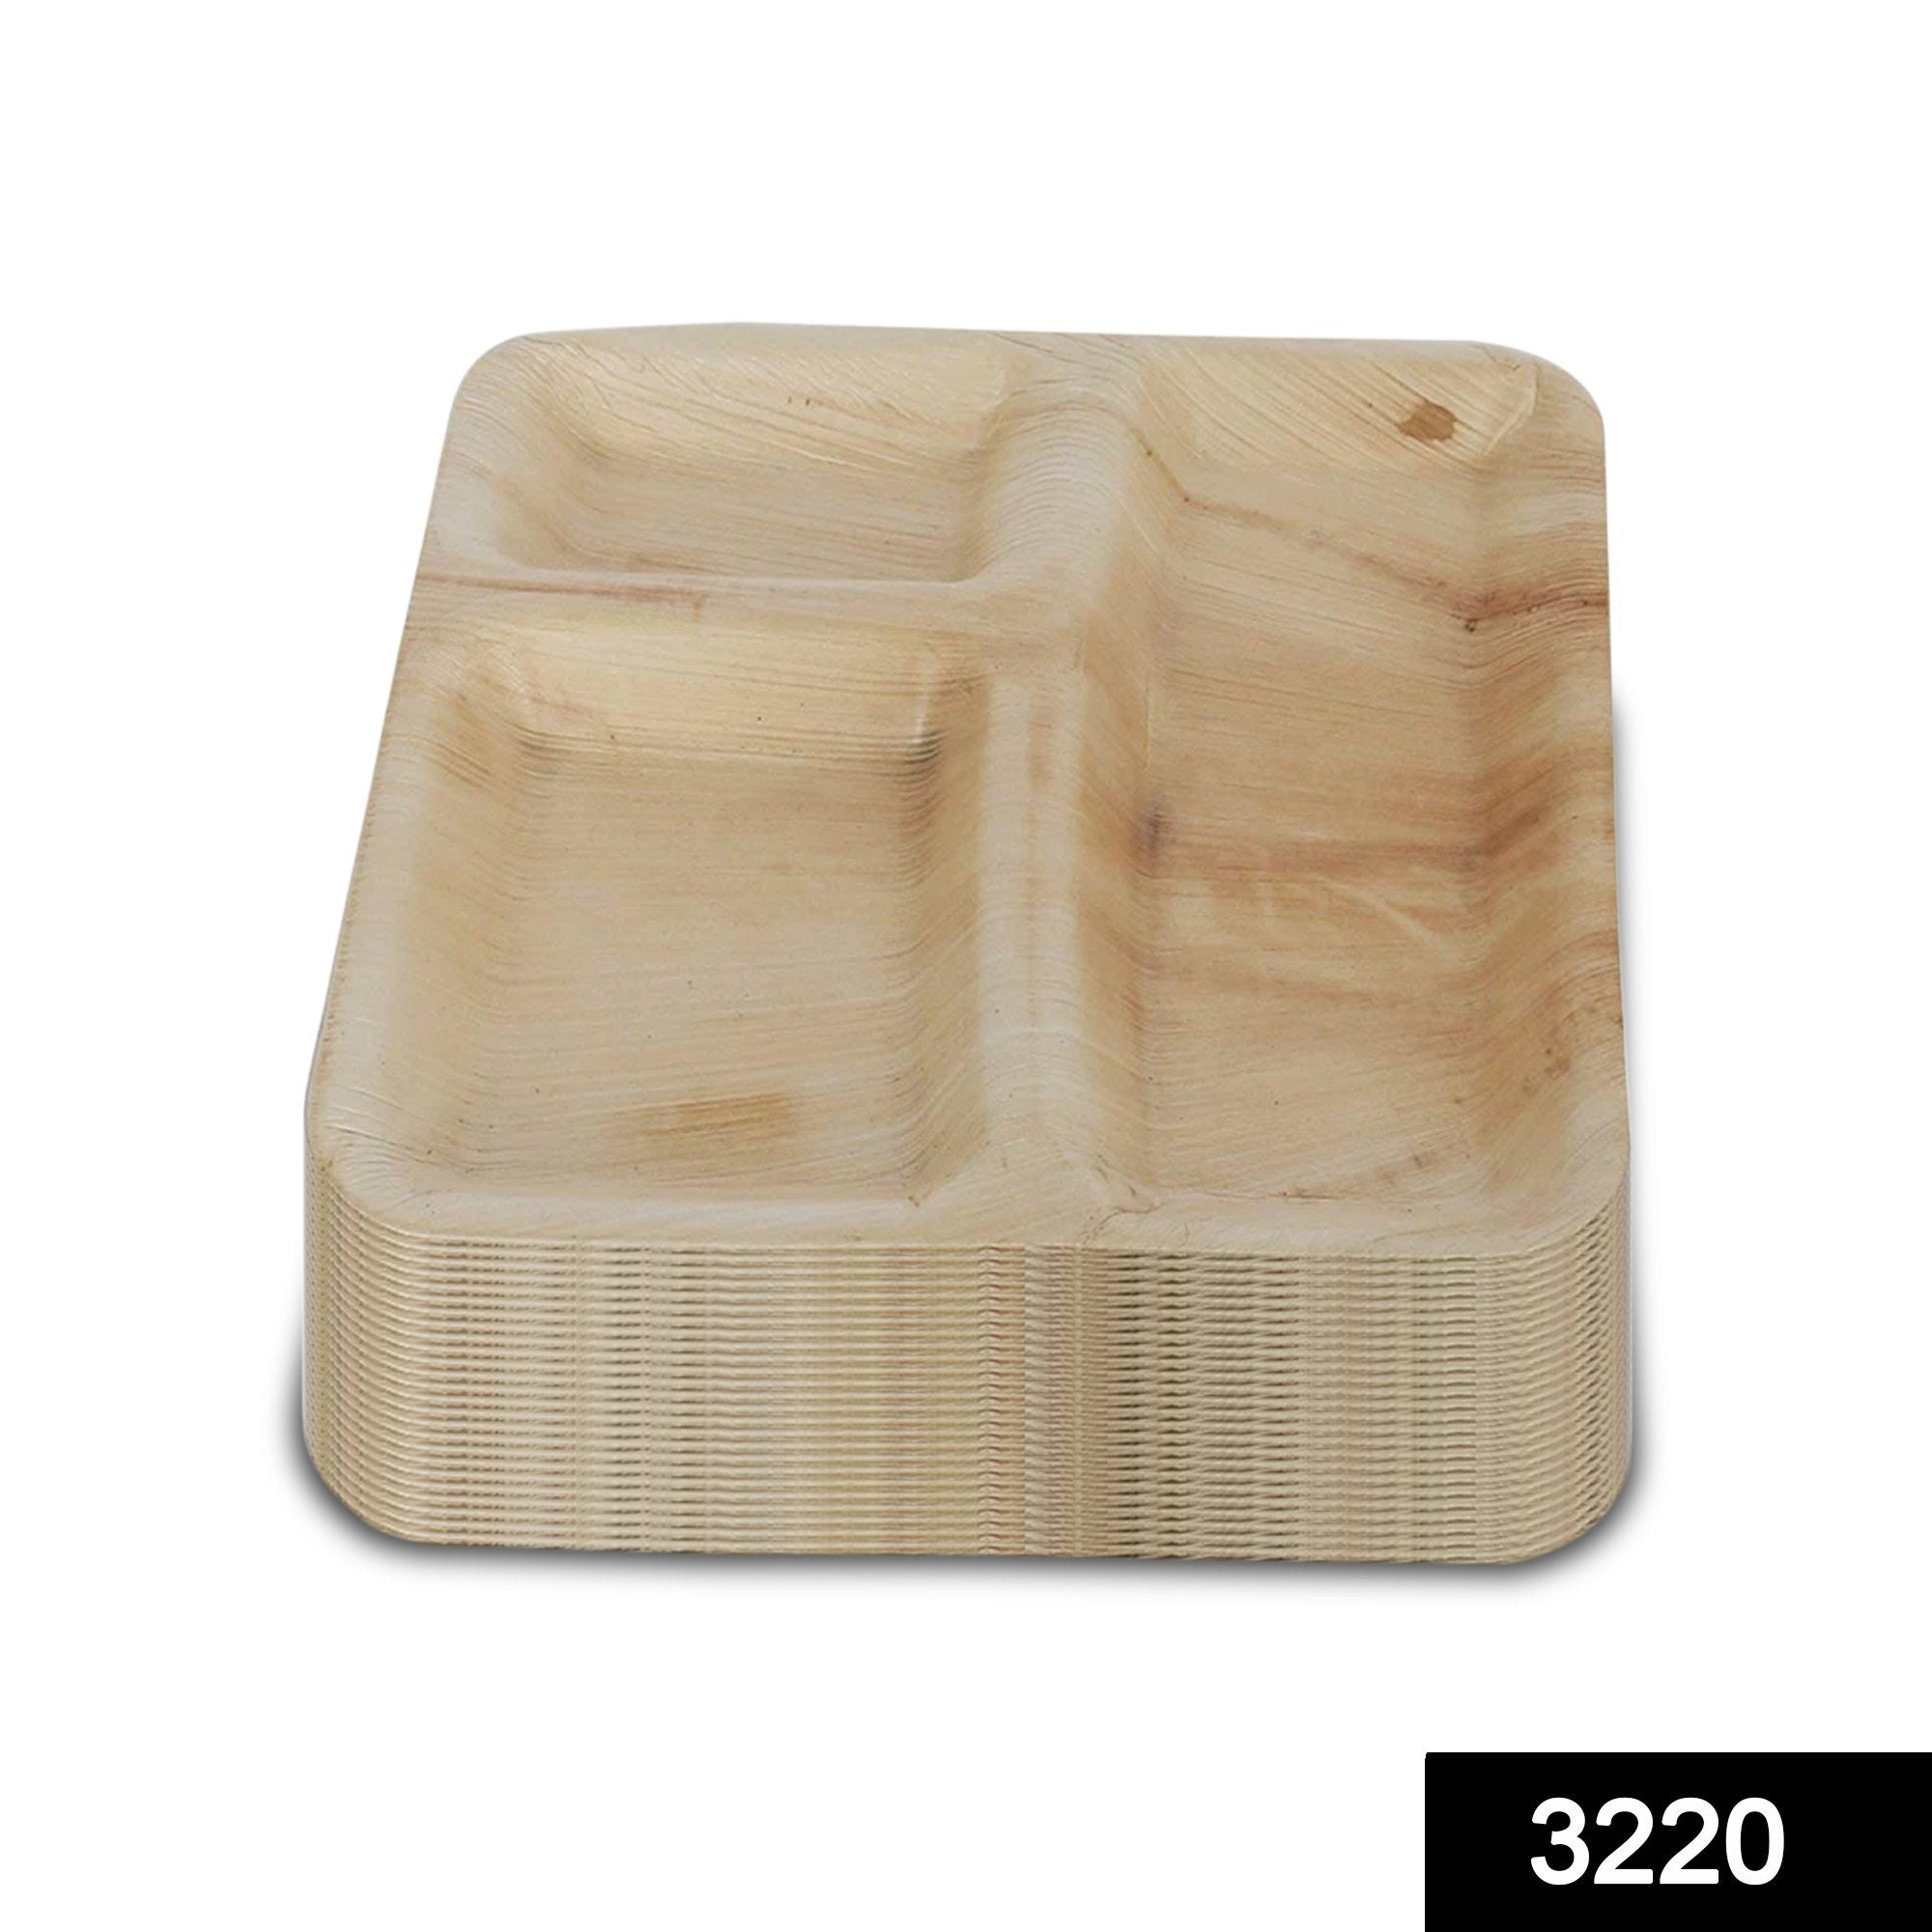 3220 Disposable Square Shape Eco-friendly Areca Palm Leaf Plate (10x10 inch) (pack of 25) - SkyShopy